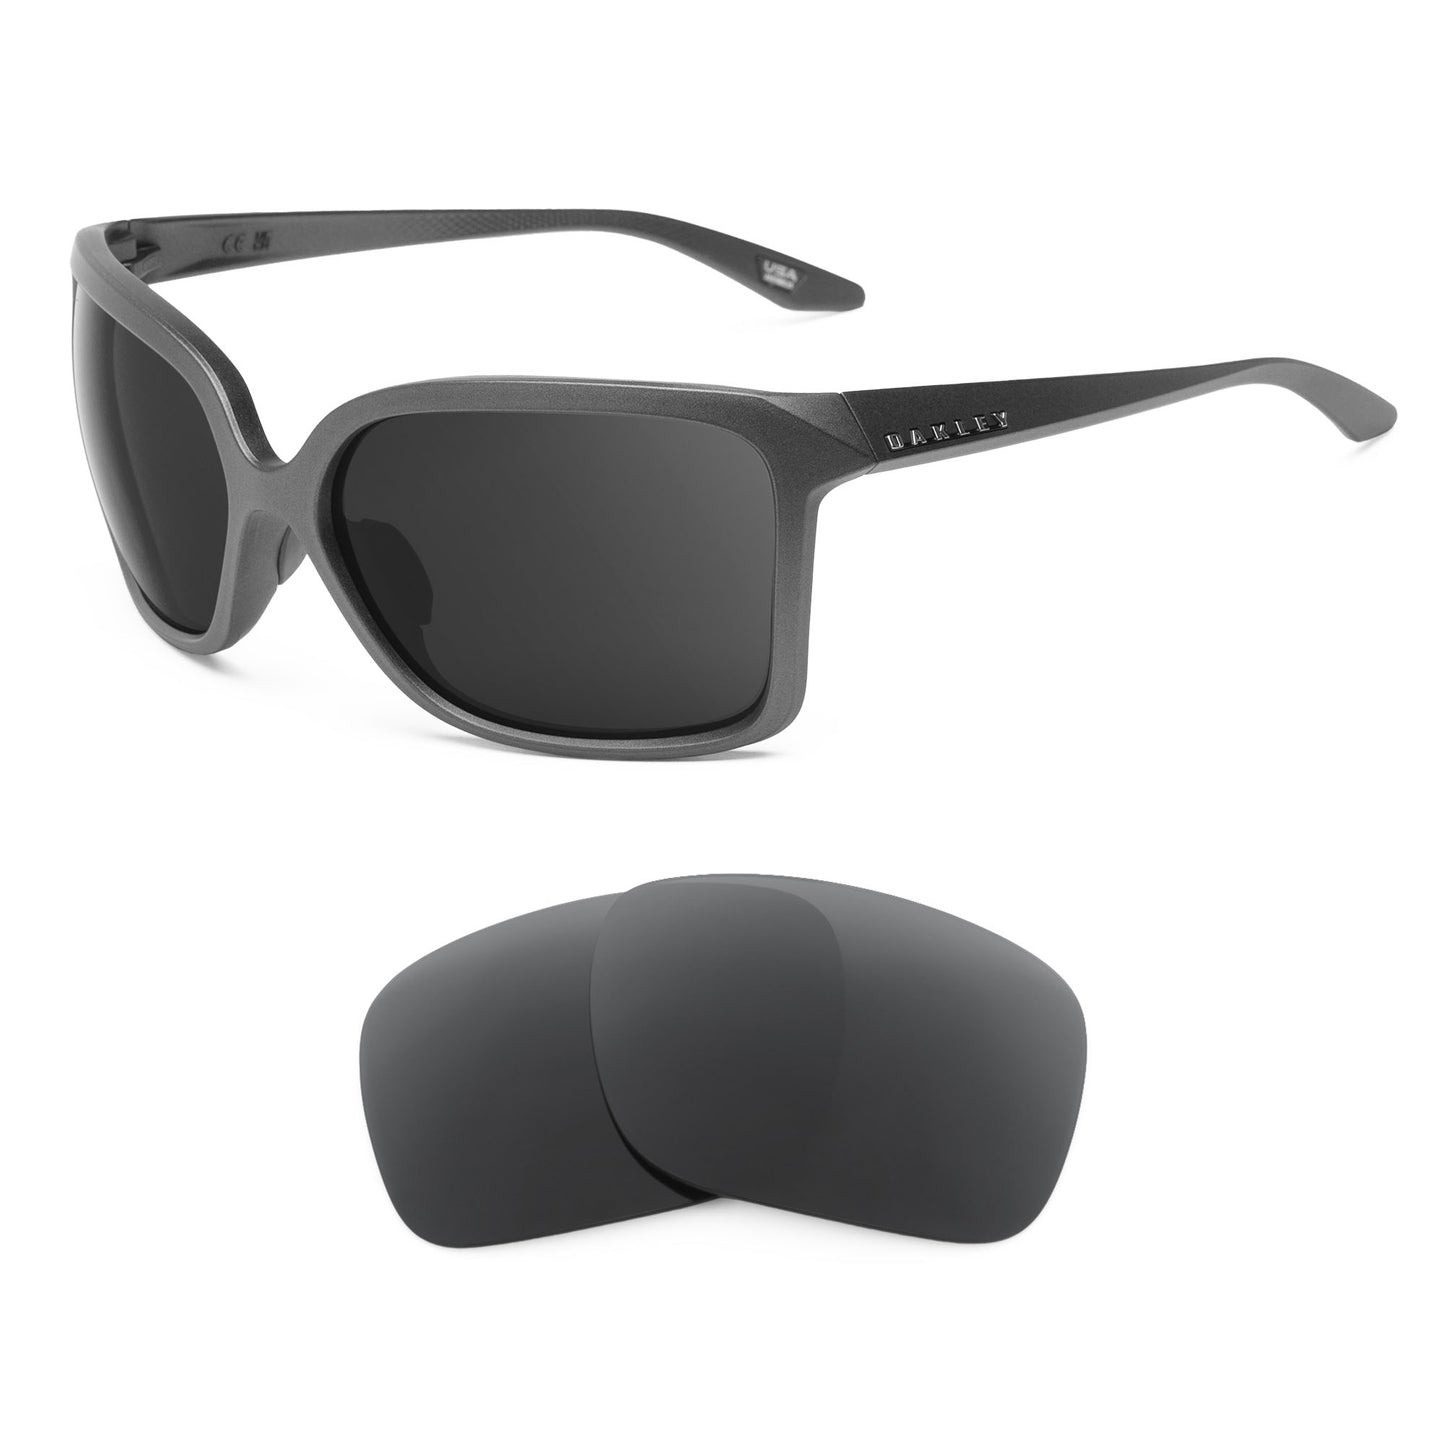 Oakley Wildrye sunglasses with replacement lenses